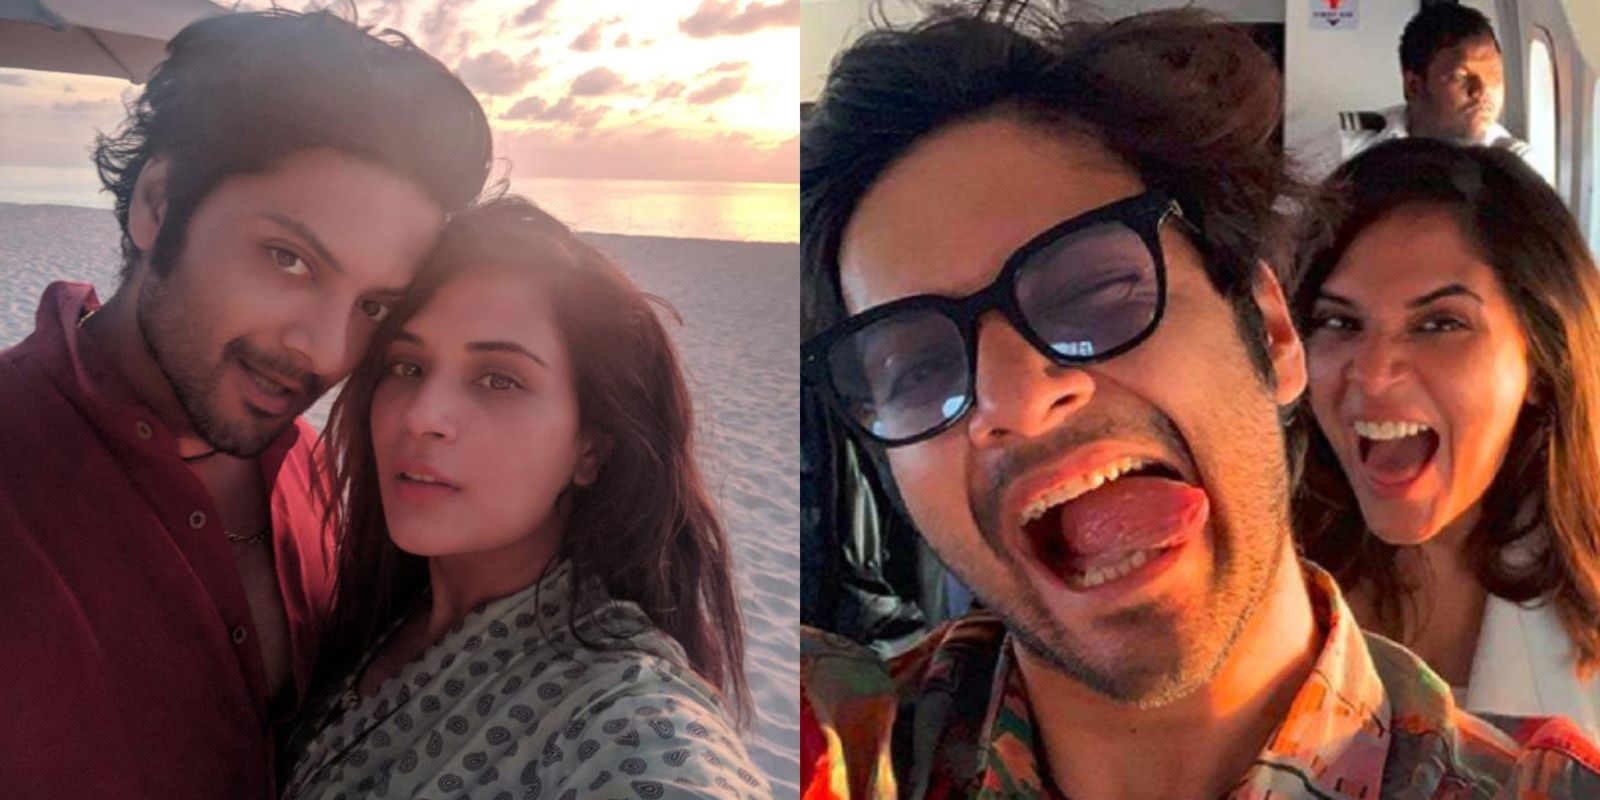 Ali Fazal Proposed To Richa Chadha In Maldives; Will Tie The Knot In A Quirky, Unconventional Wedding